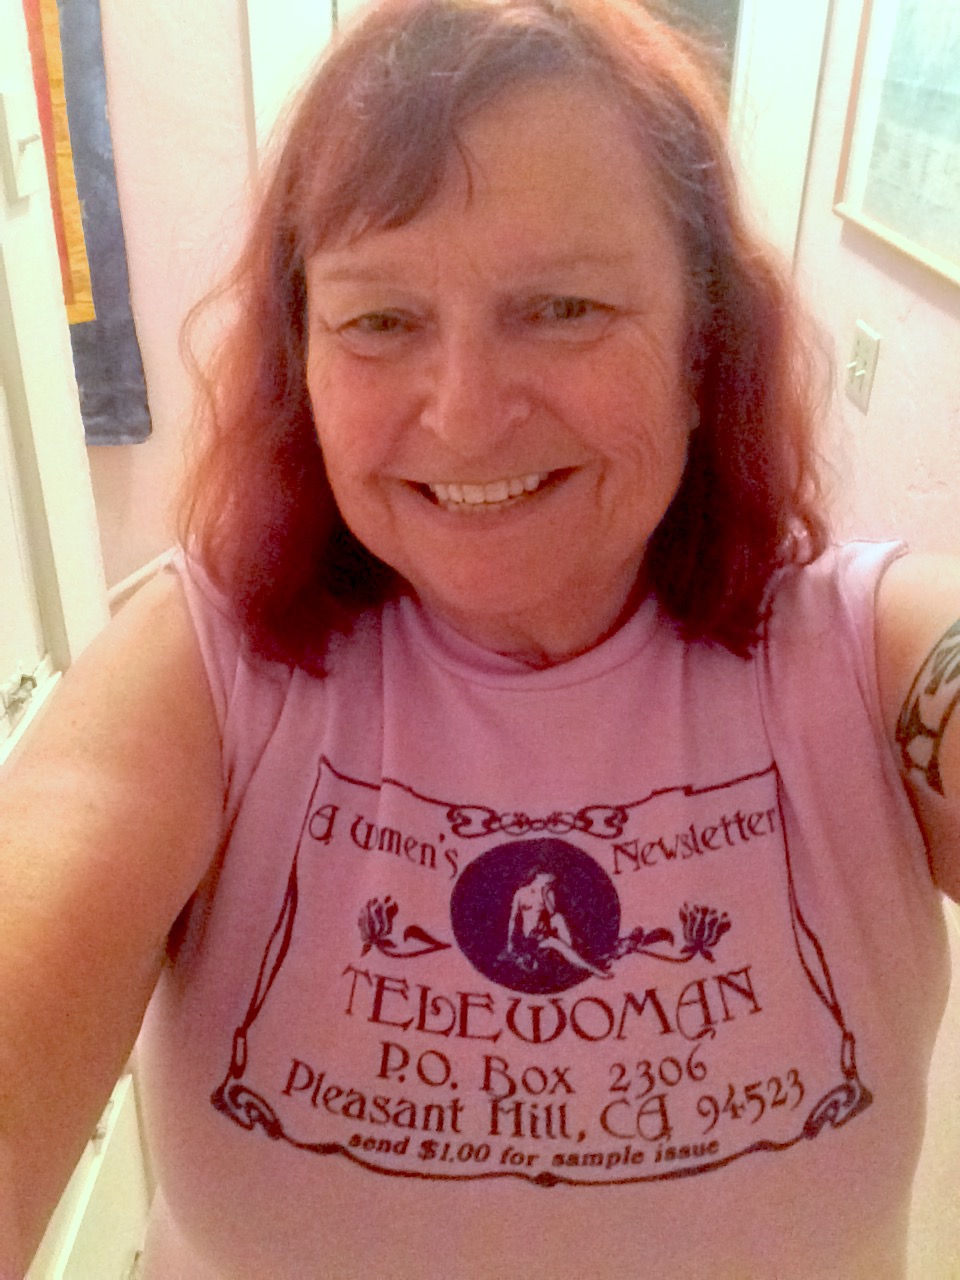 Beth wearing a light pink shirt that reads “Telewoman: A Women’s Newsletter”, 2016. Beth shares,	“In 1983, Anne D’Arcy, editor of Telewoman, a monthly lesbian literary and networking magazine, dragged my by the scruff of my neck off the lesbian community blacklist. I’d write a column and reviews for Telewoman for three years.” Photo courtesy of Beth Elliott.